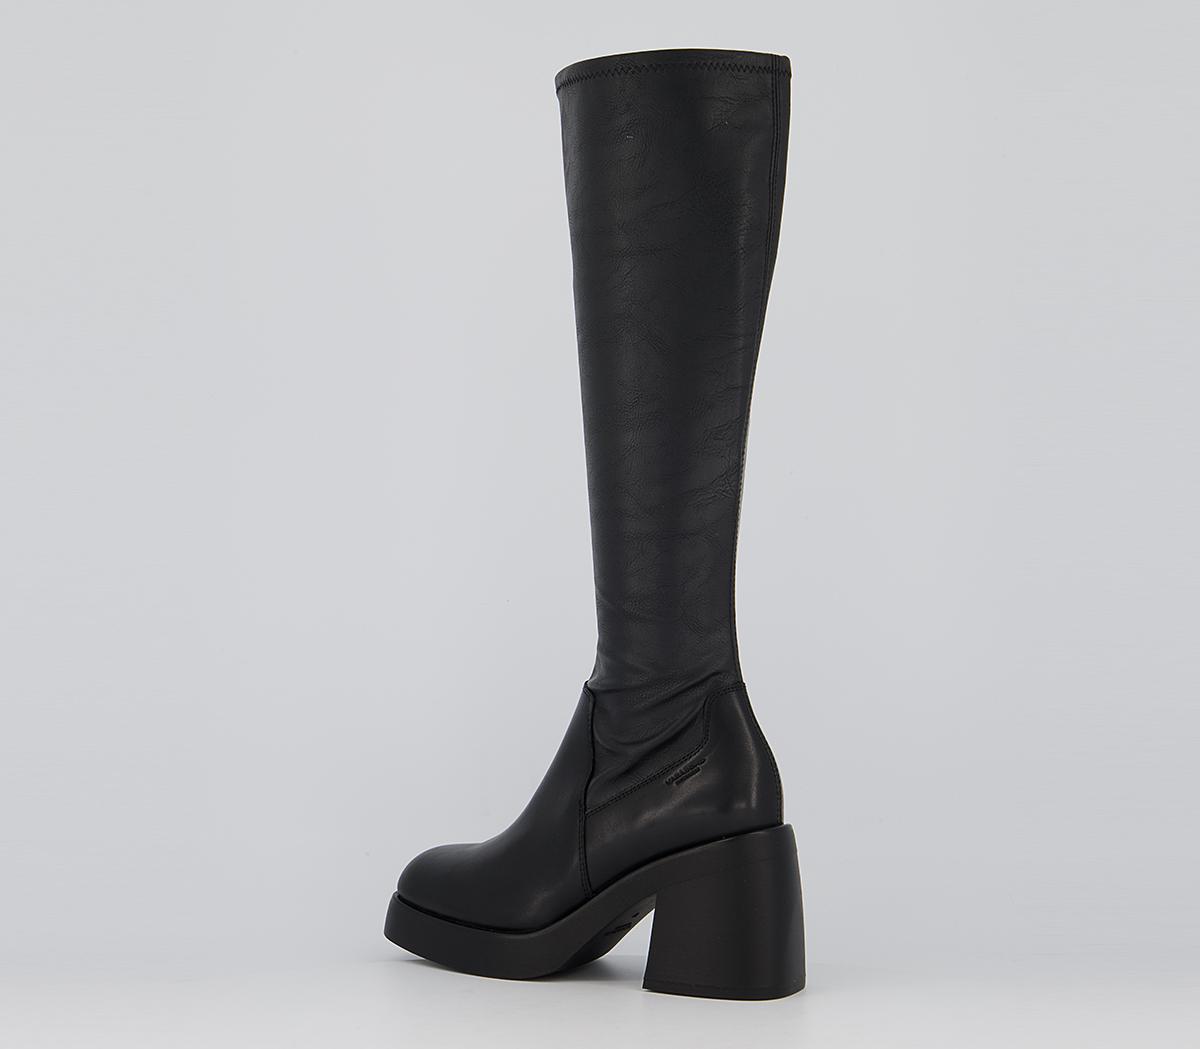 Vagabond Shoemakers Brooke High Stretch Boots Black - Knee High Boots